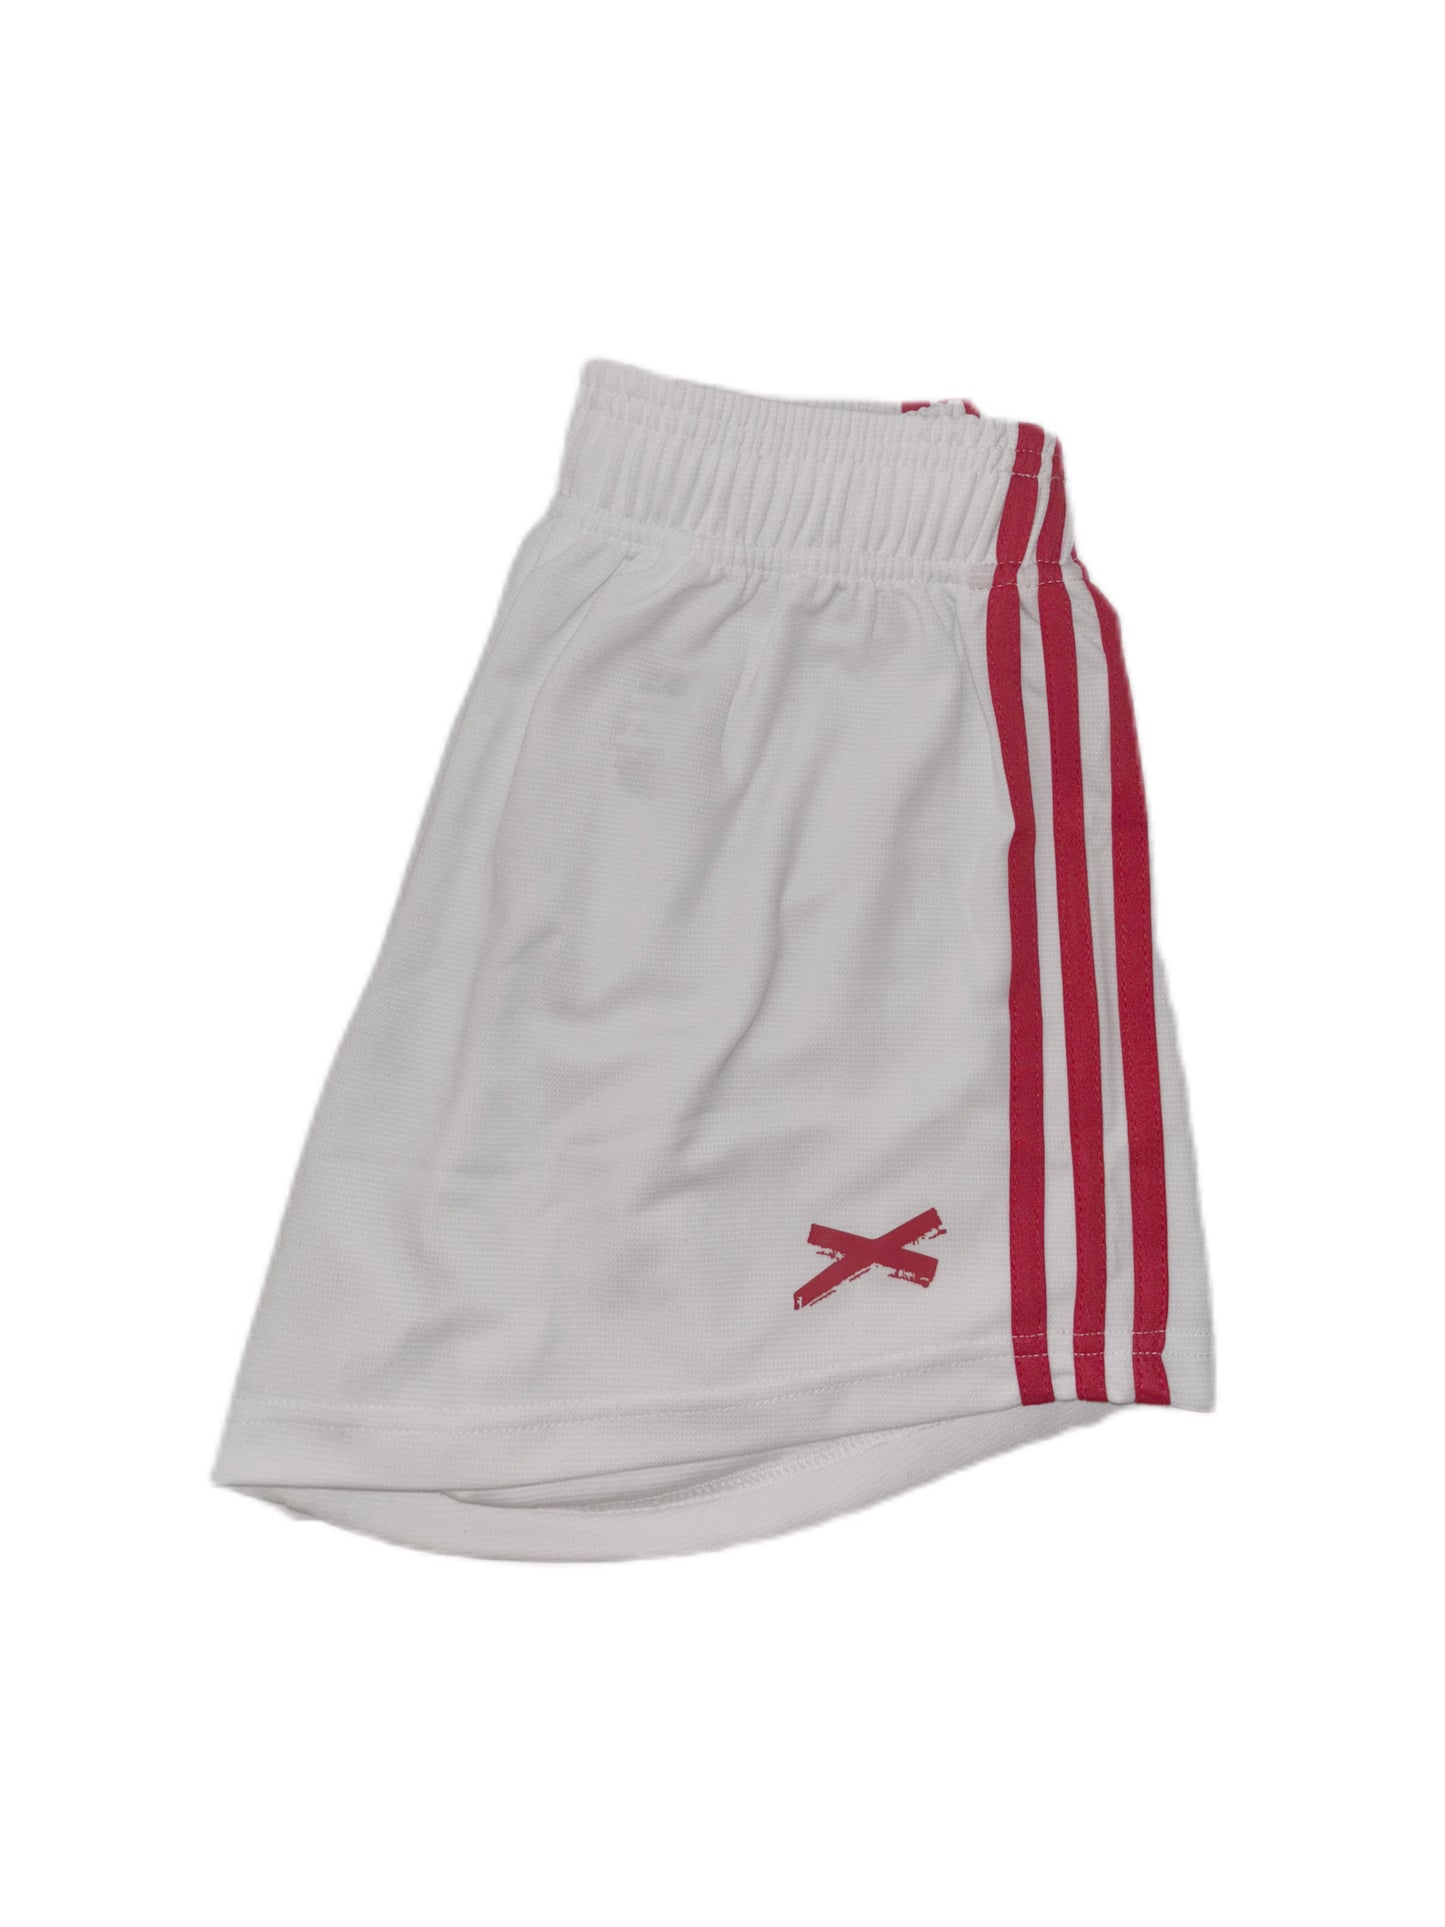 New and Improved GAA Shorts